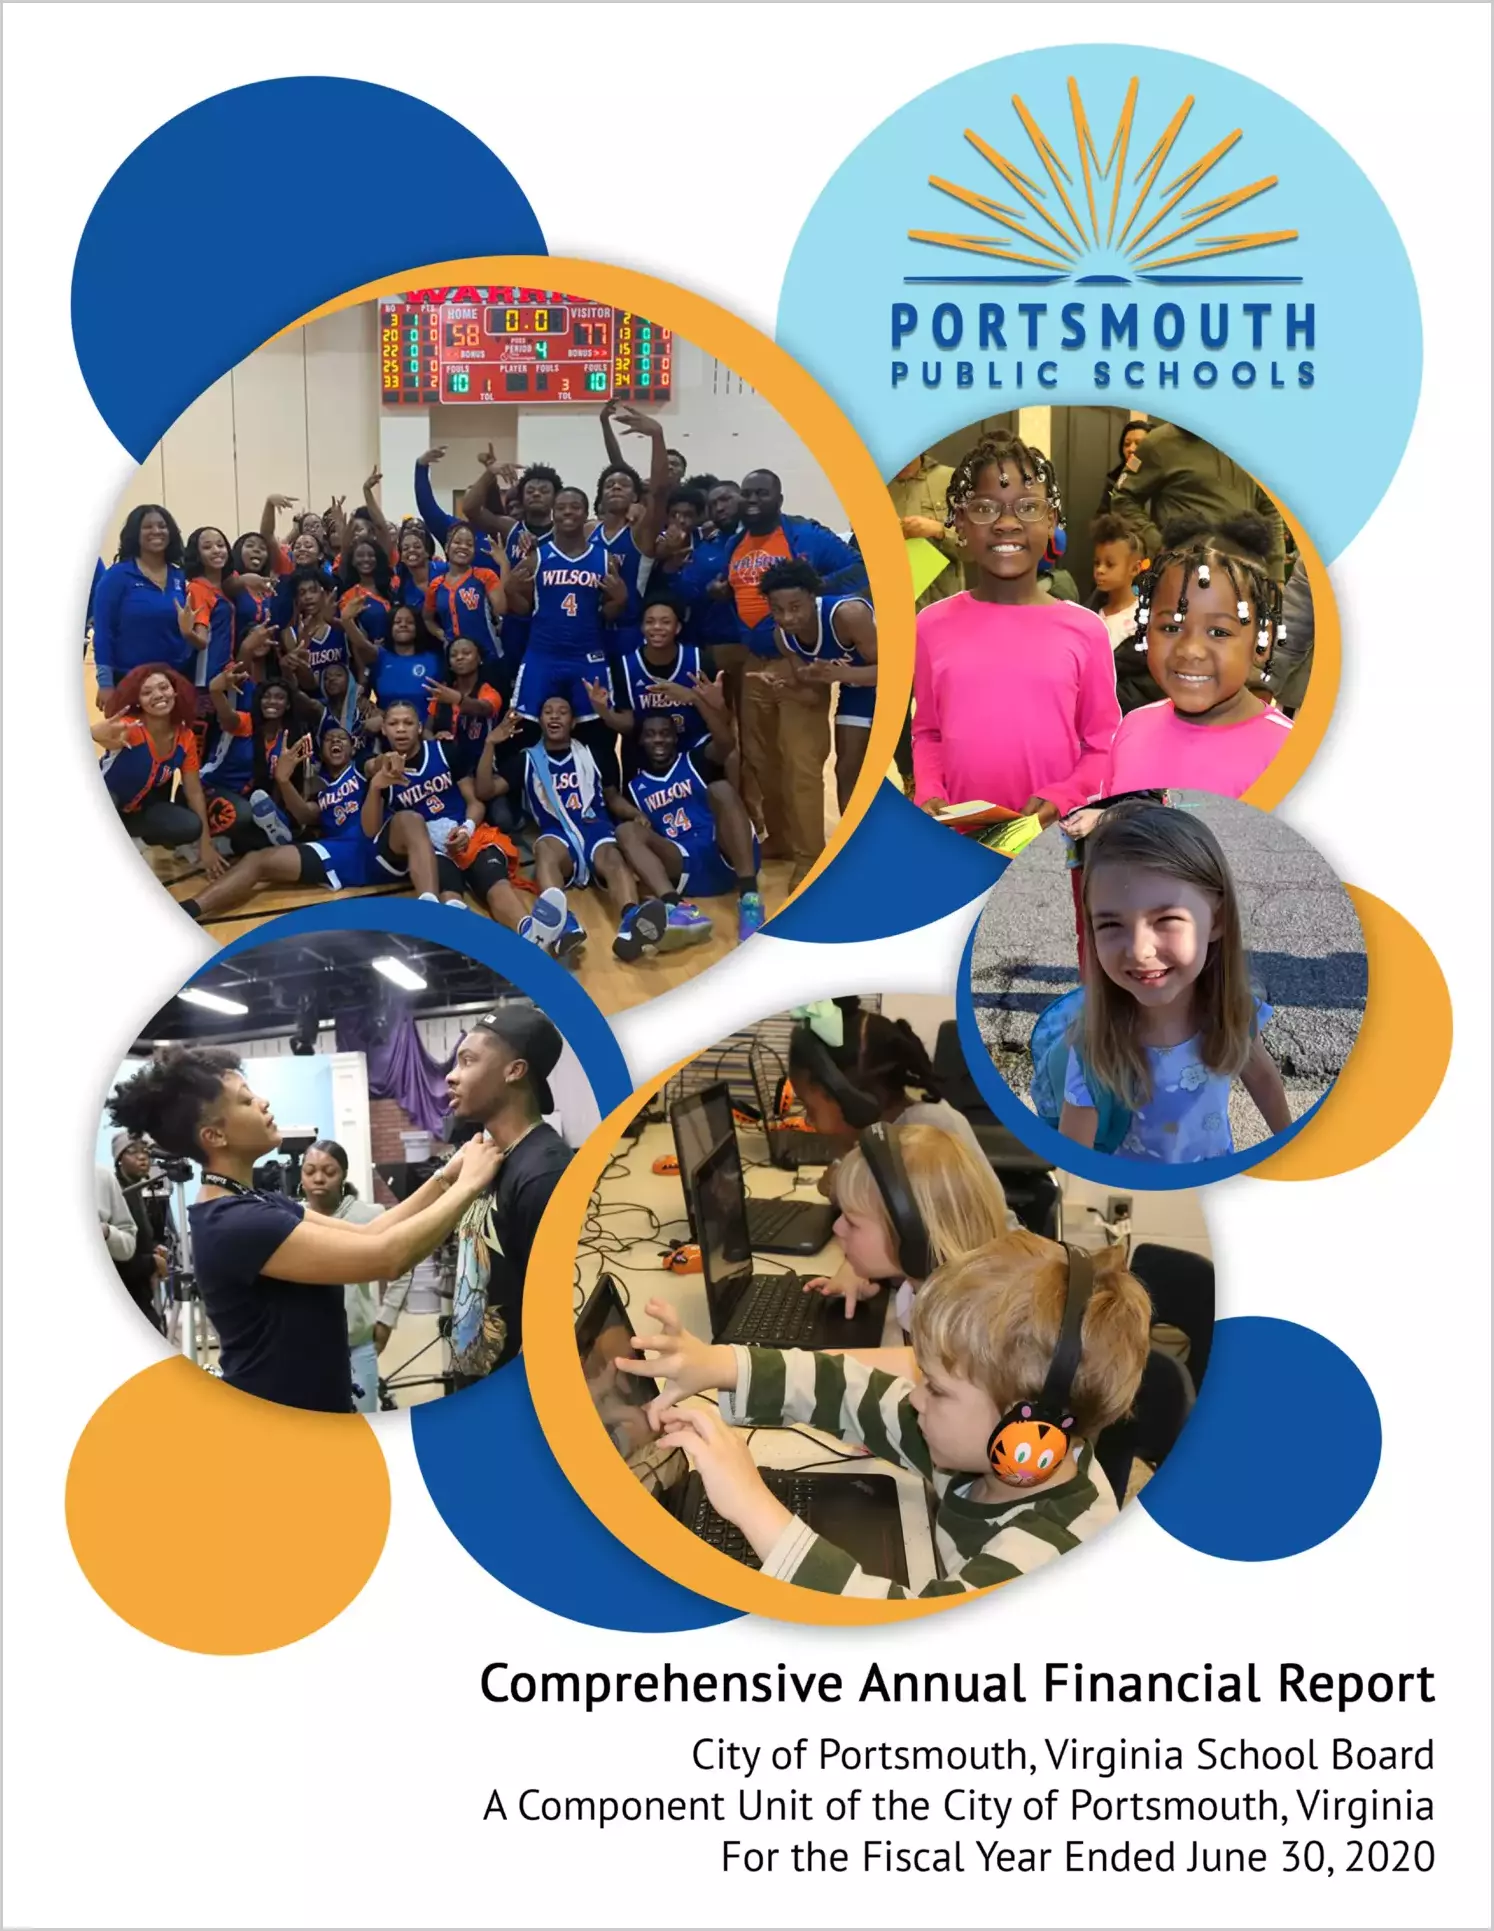 2020 Public Schools Annual Financial Report for City of Portsmouth